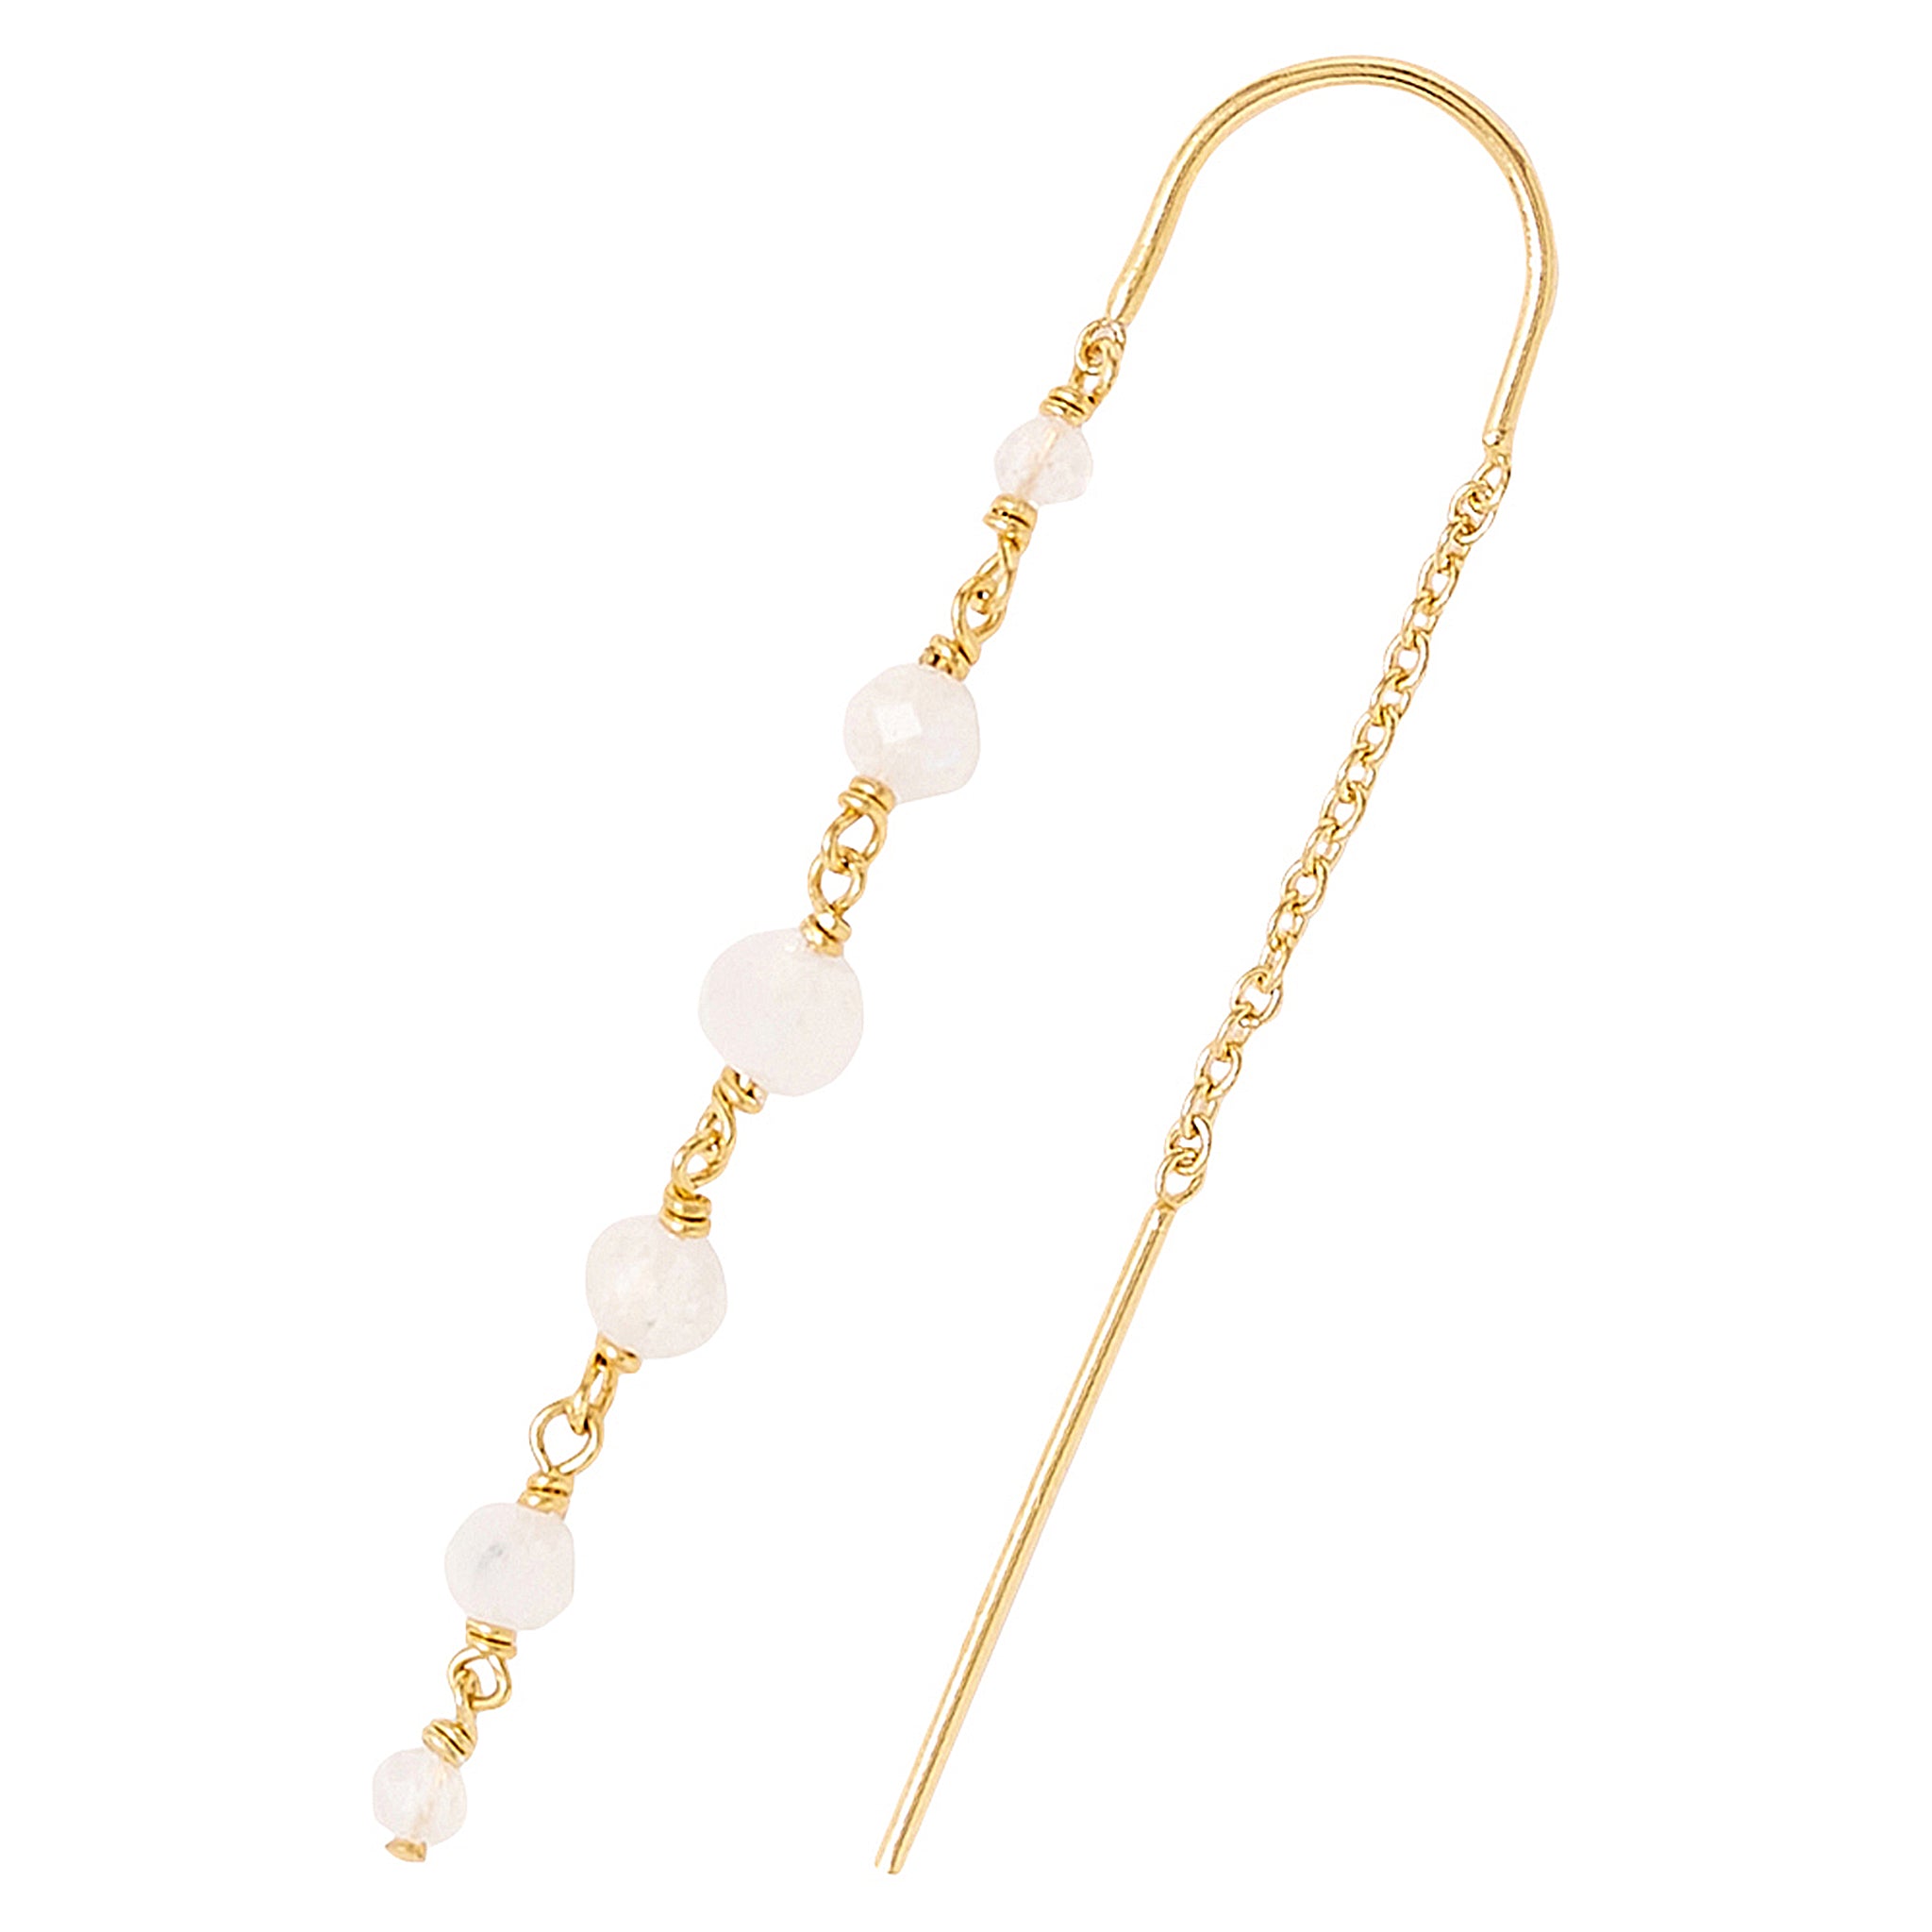 Chan Luu Tiered Threader Dangle Earrings in Moonstone and Gold